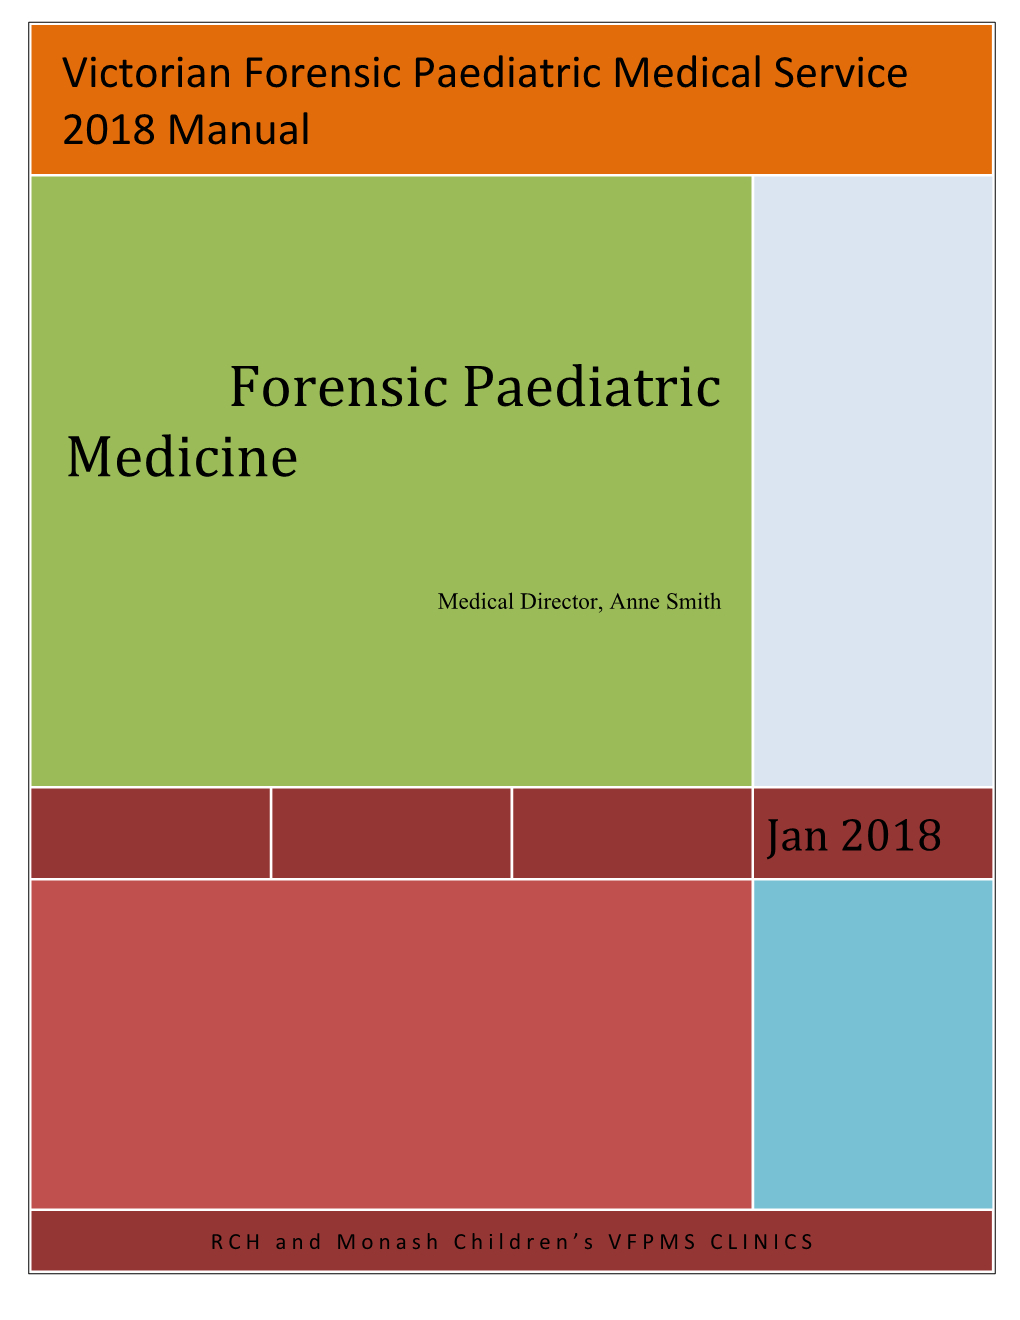 Forensic Paediatric Medicine Trainees Advice and Information